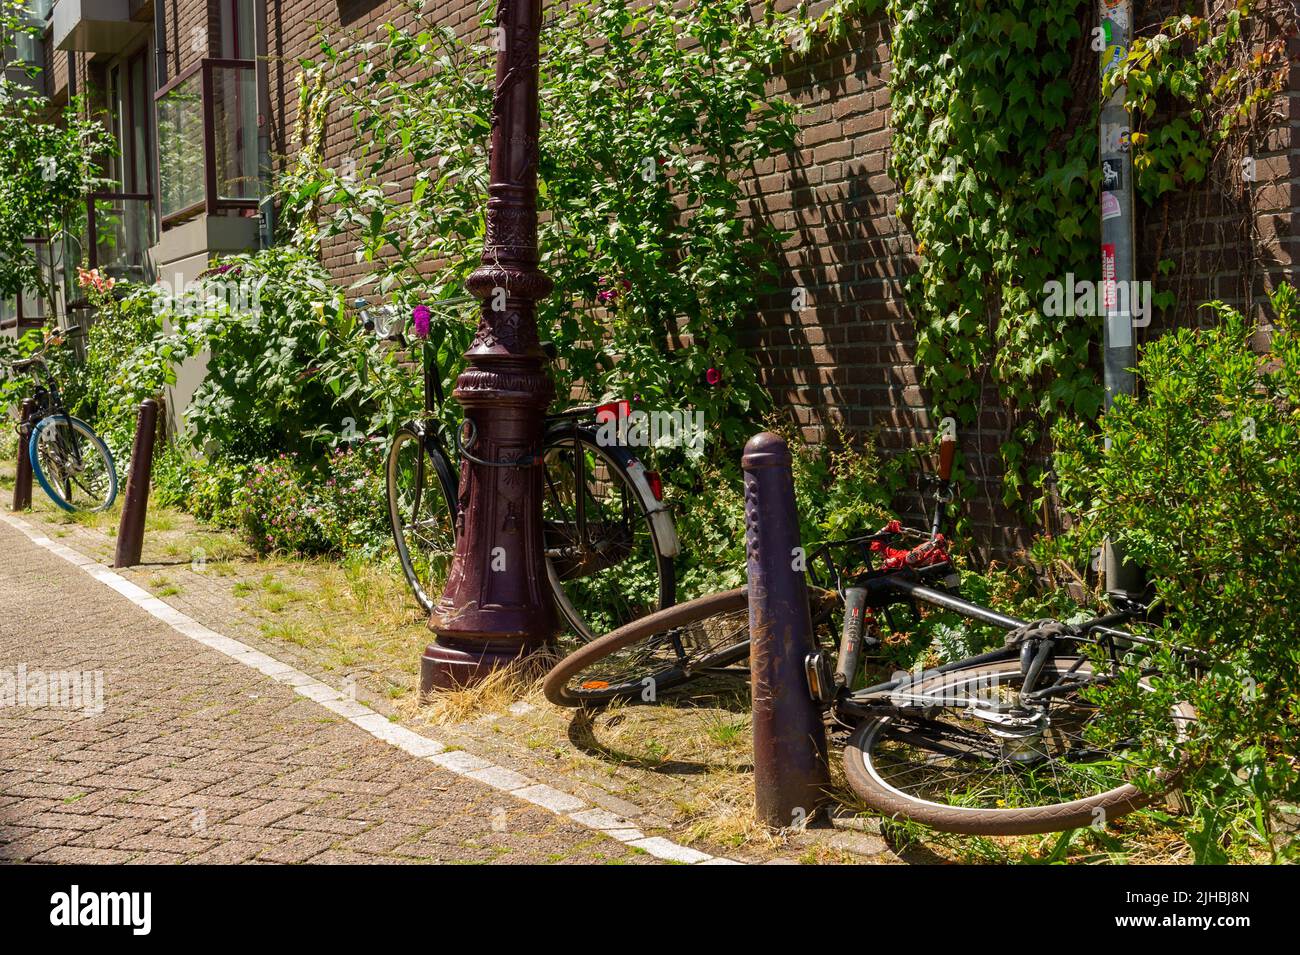 Abandoned Bicycles on an Amsterdam side street in the sunshine Stock Photo